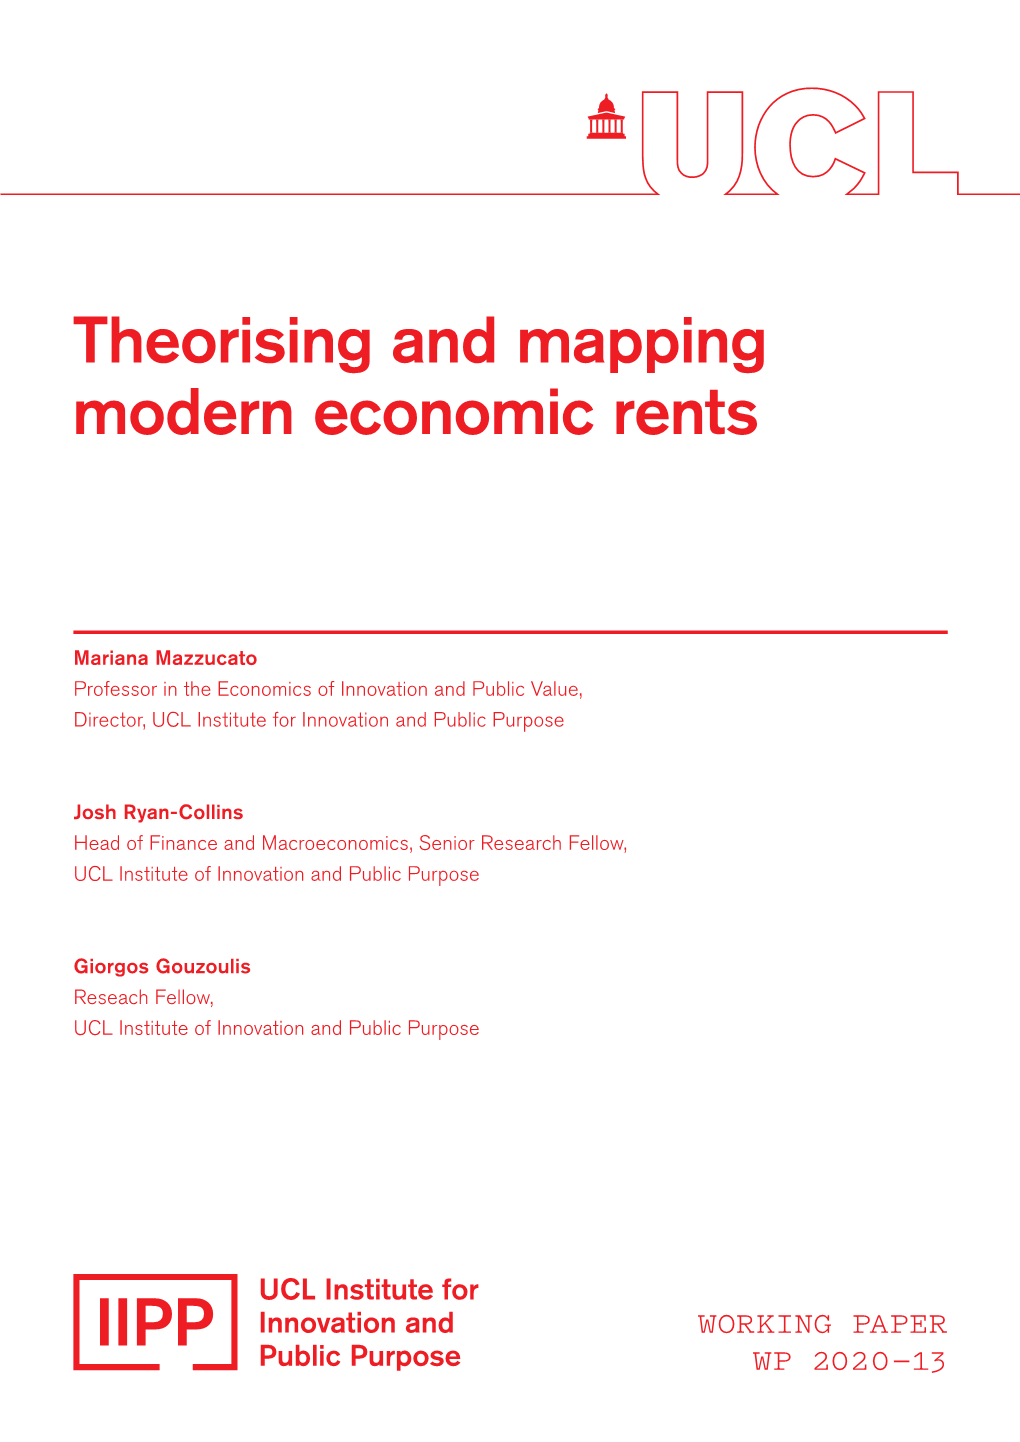 Theorising and Mapping Modern Economic Rents